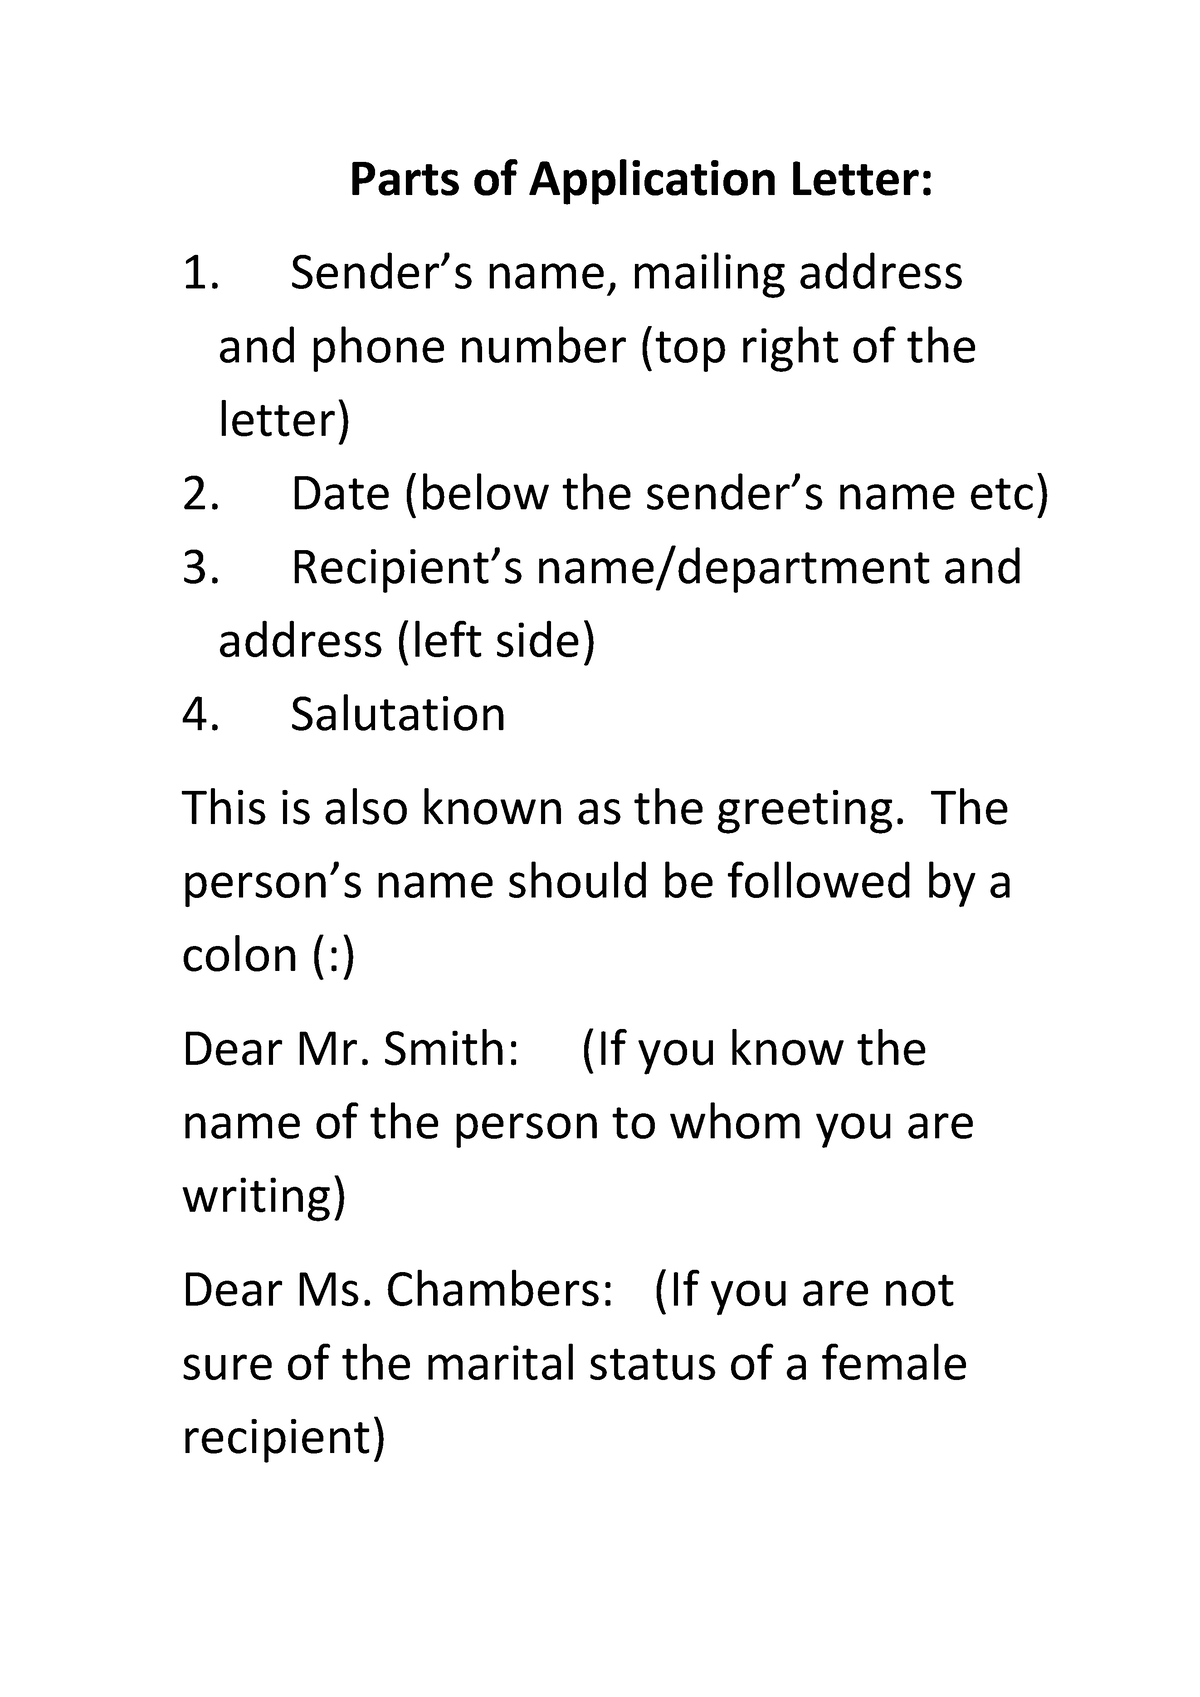 what are the five parts of application letter